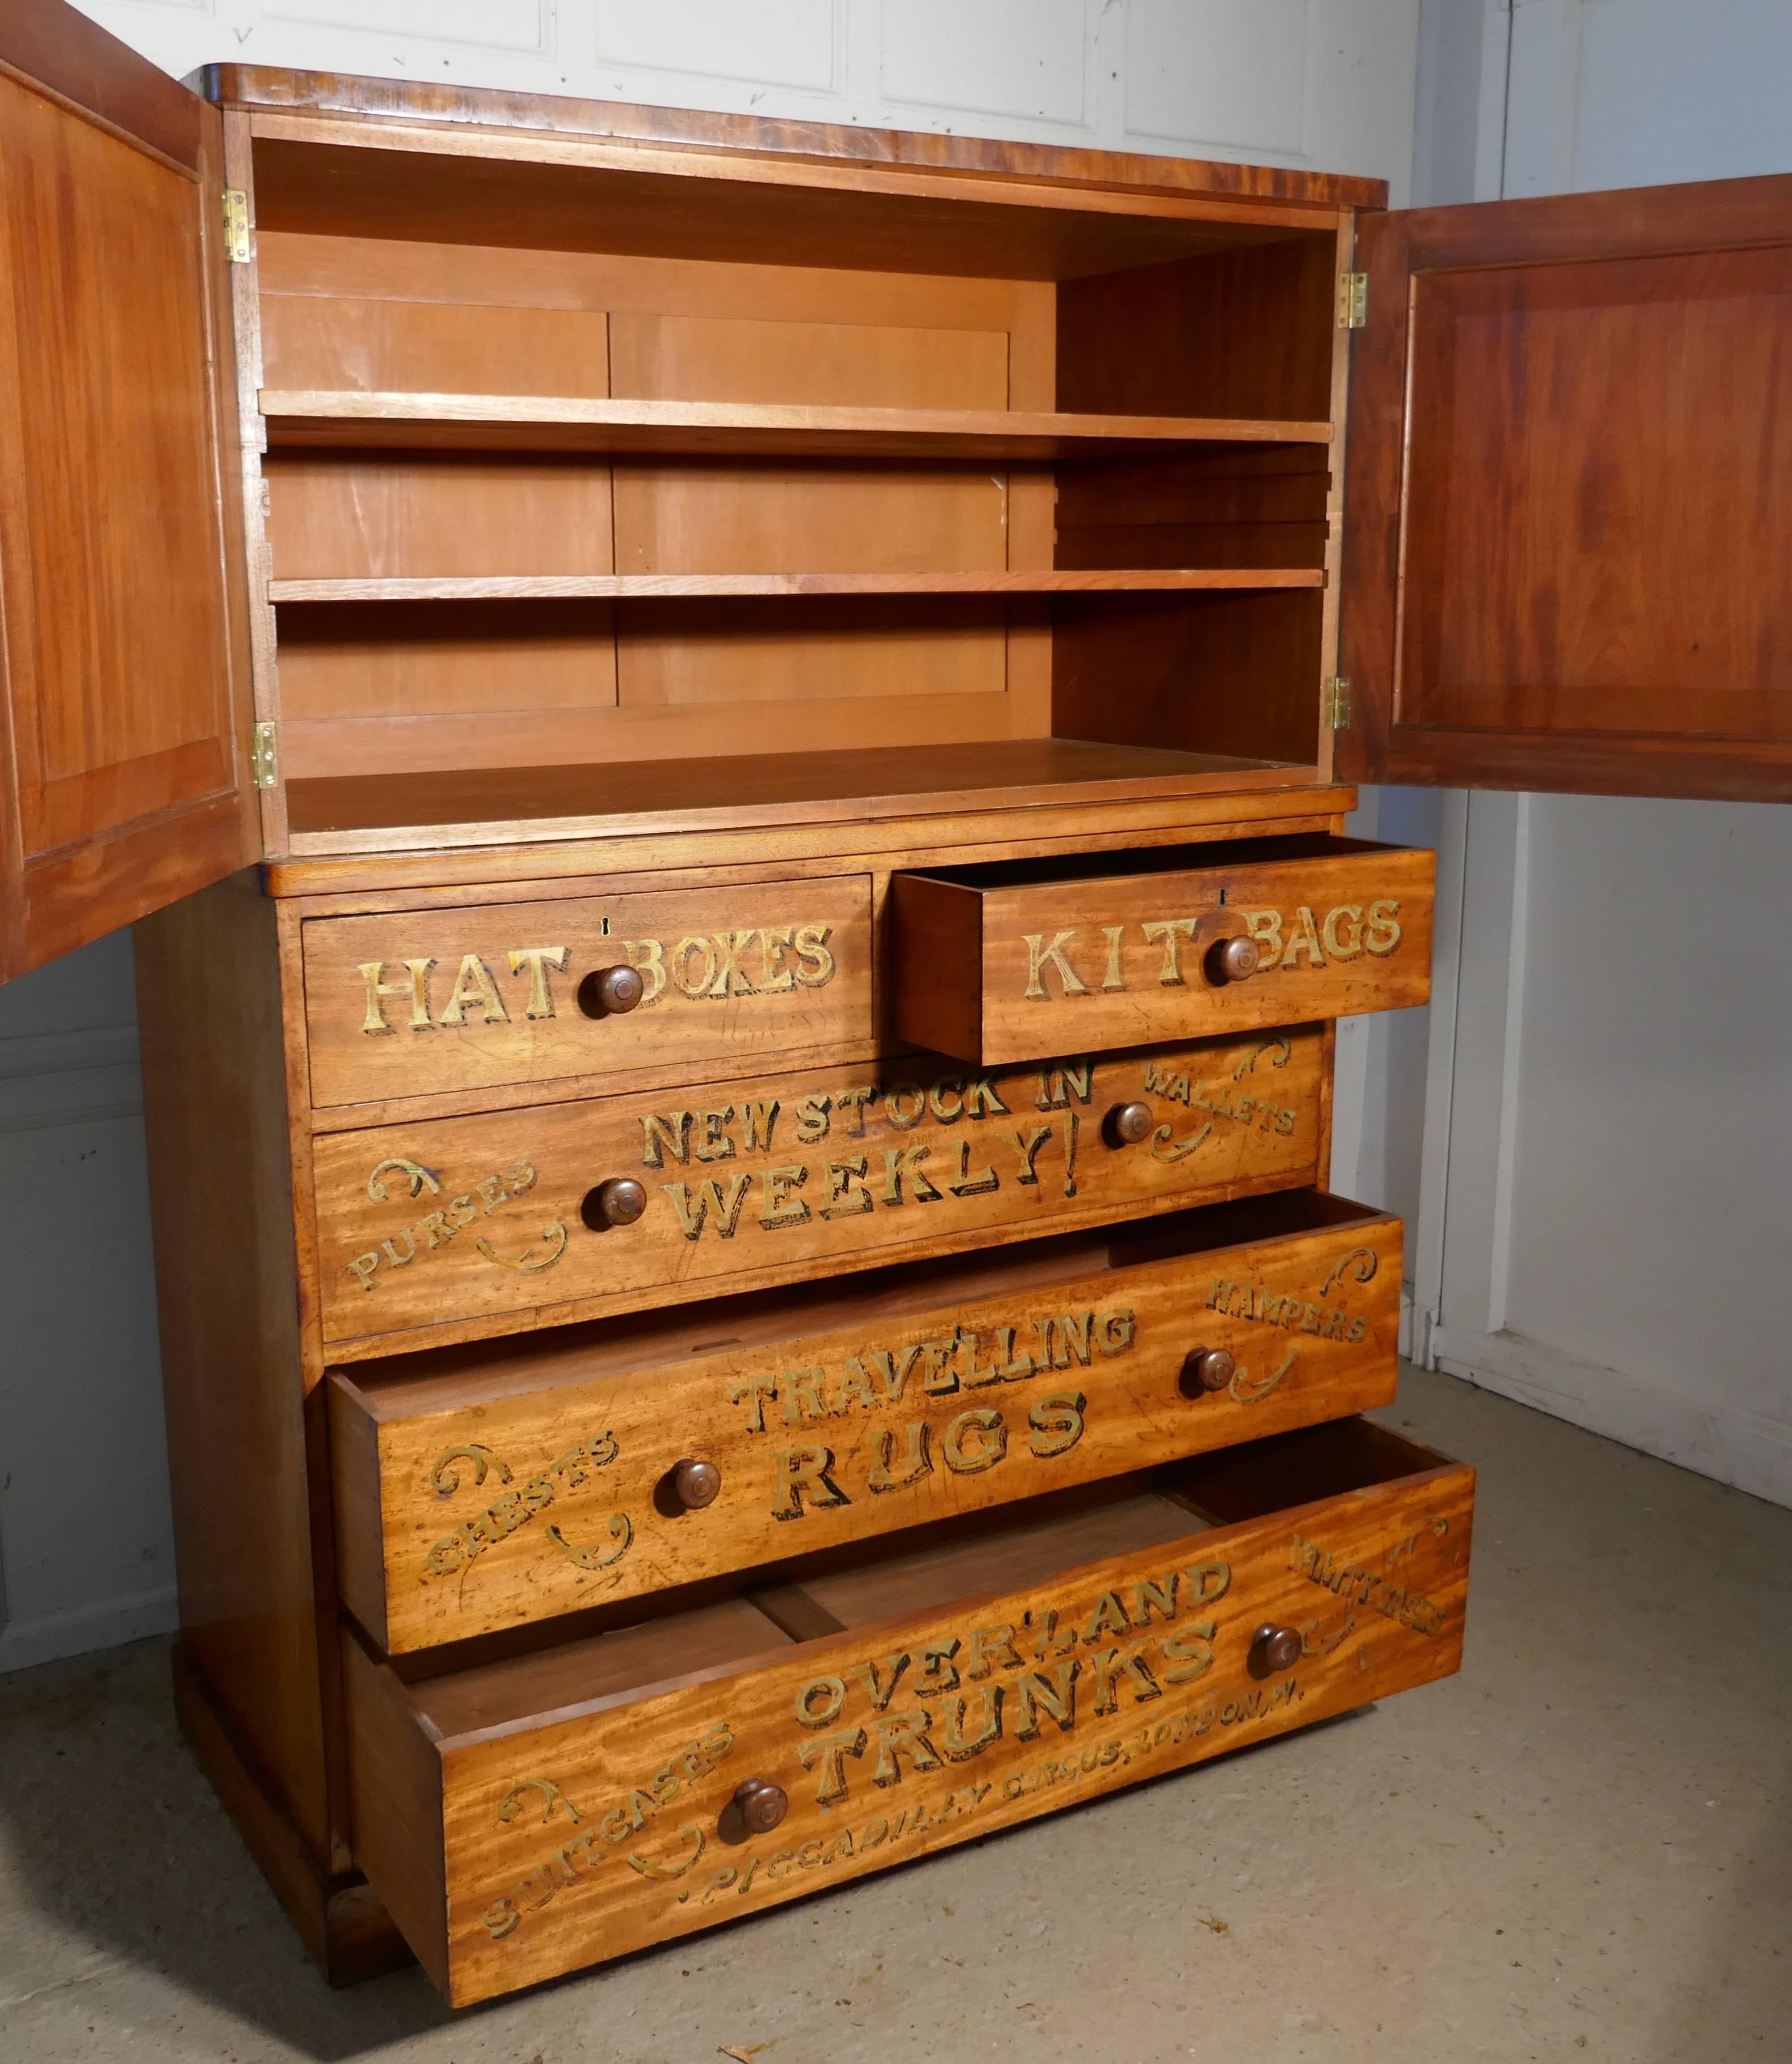 A Victorian blonde mahogany press, advertising shop display

This is a very rare and attractive piece, we have a large size chest of drawers with a panelled door cupboard over. The front of the cabinet has been painted as a display piece for Drew